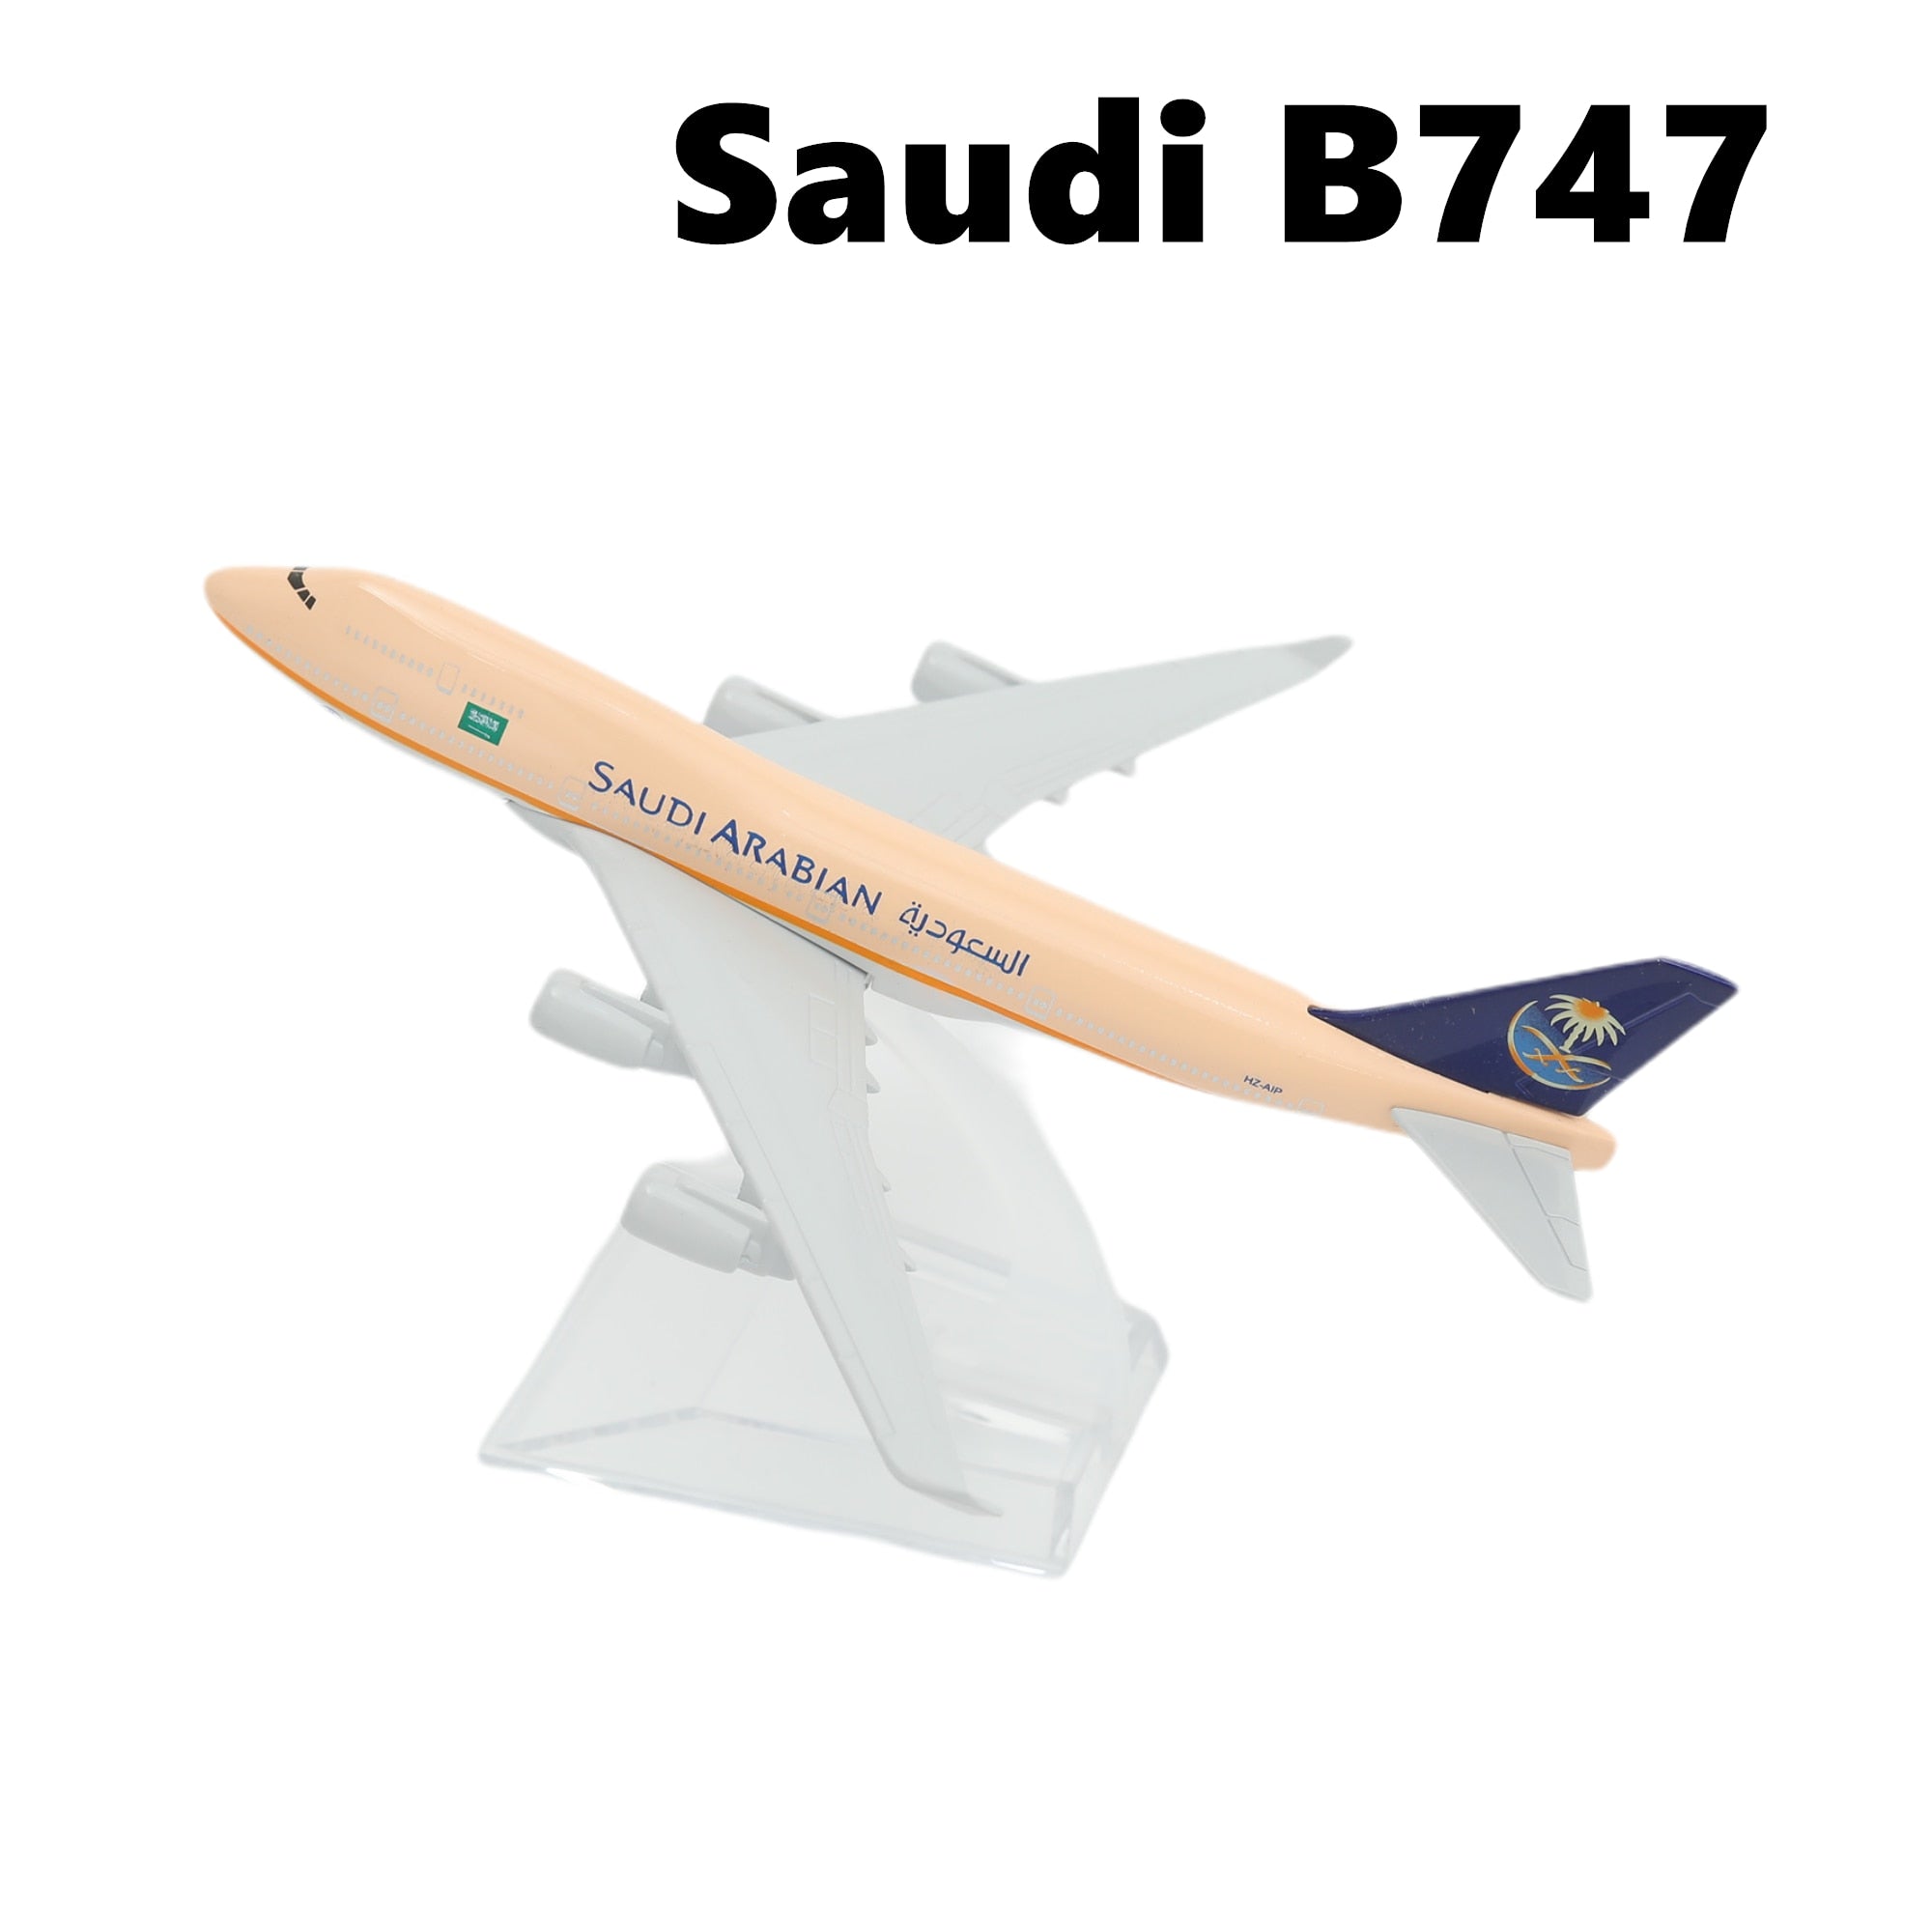 Scale 1:400 Metal Aviation Replica Airlines Plane Boeing Airbus Aircraft Model Diecast Airplane Miniature Kids Toys for Boys